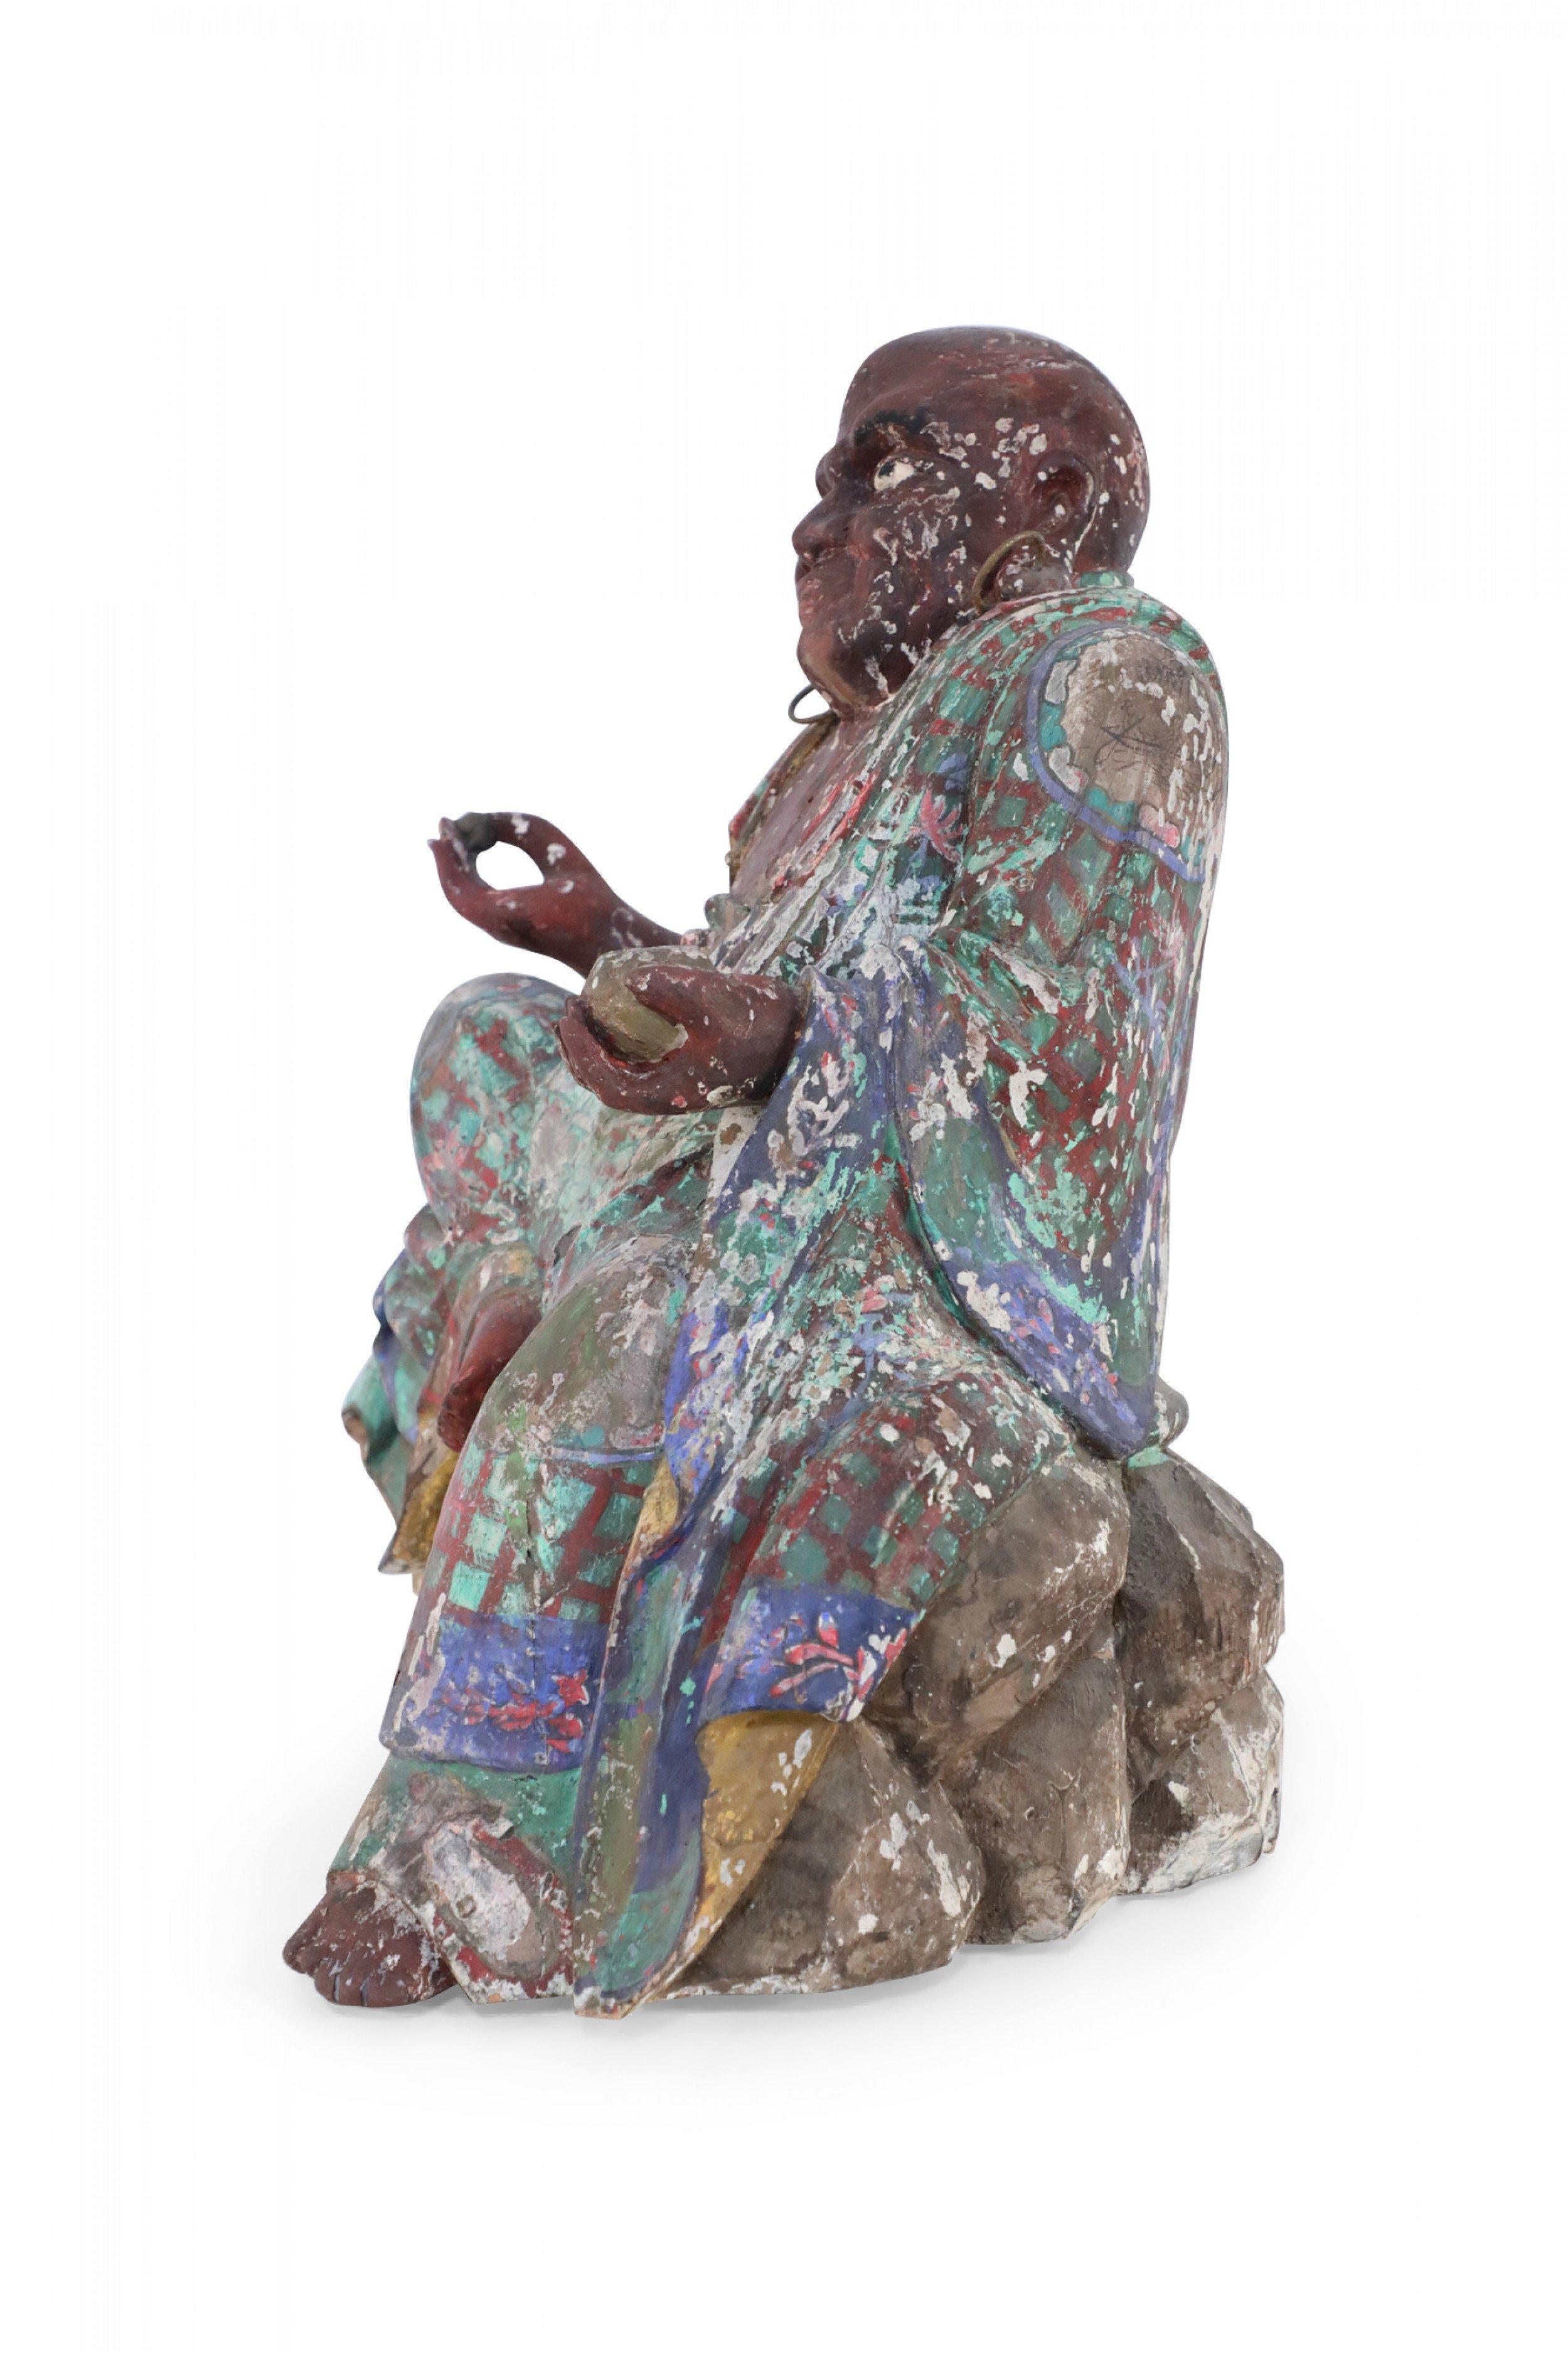 Antique Chinese Painted Clay Buddha Statue with Green and Brown Robes For Sale 2